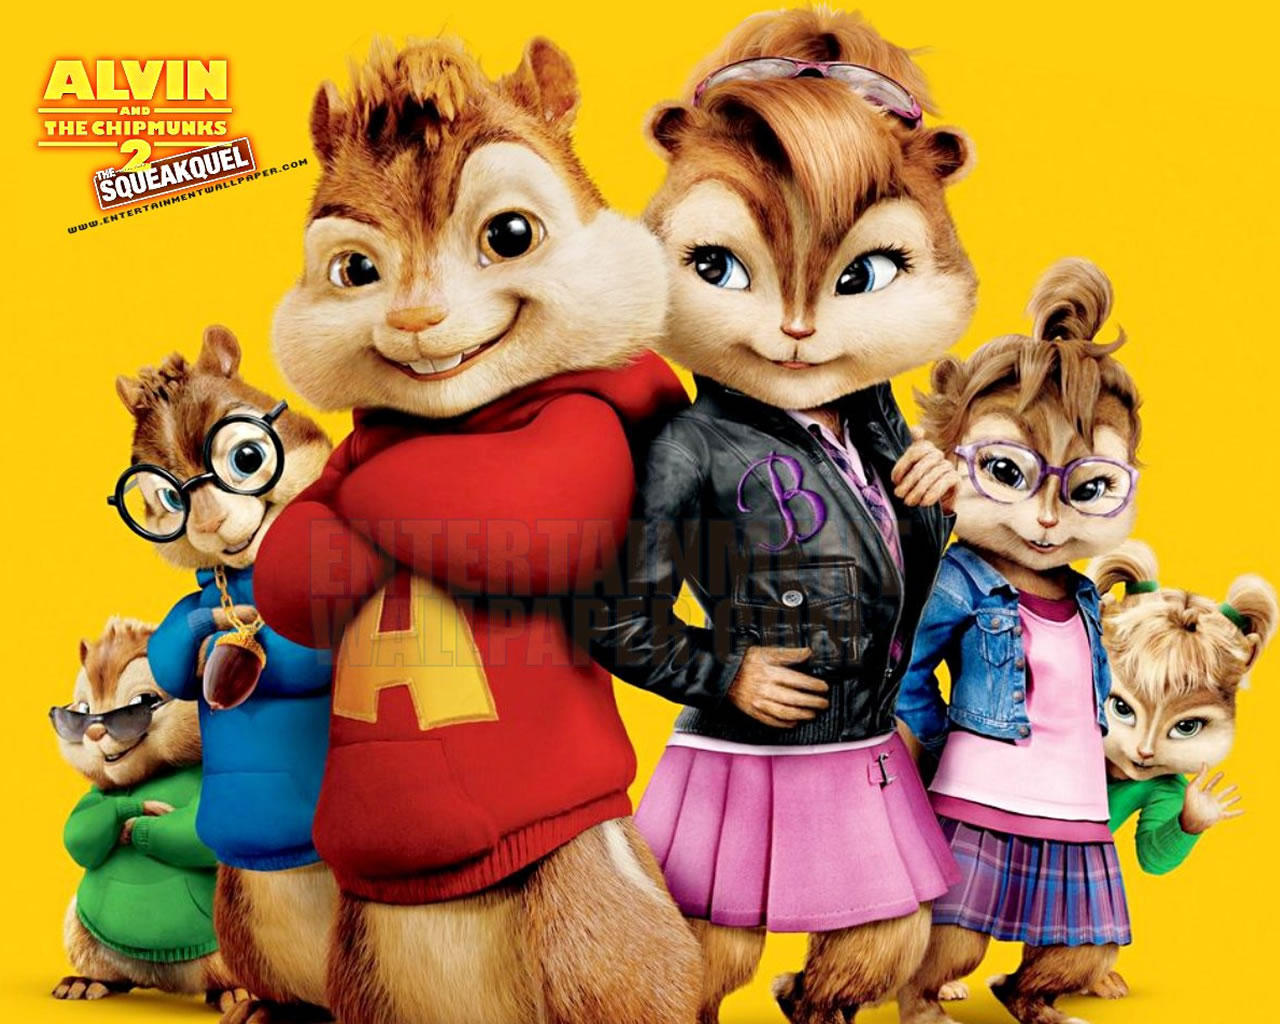 alvin_and_the_chipmunks_the_squeakquel04.jpg